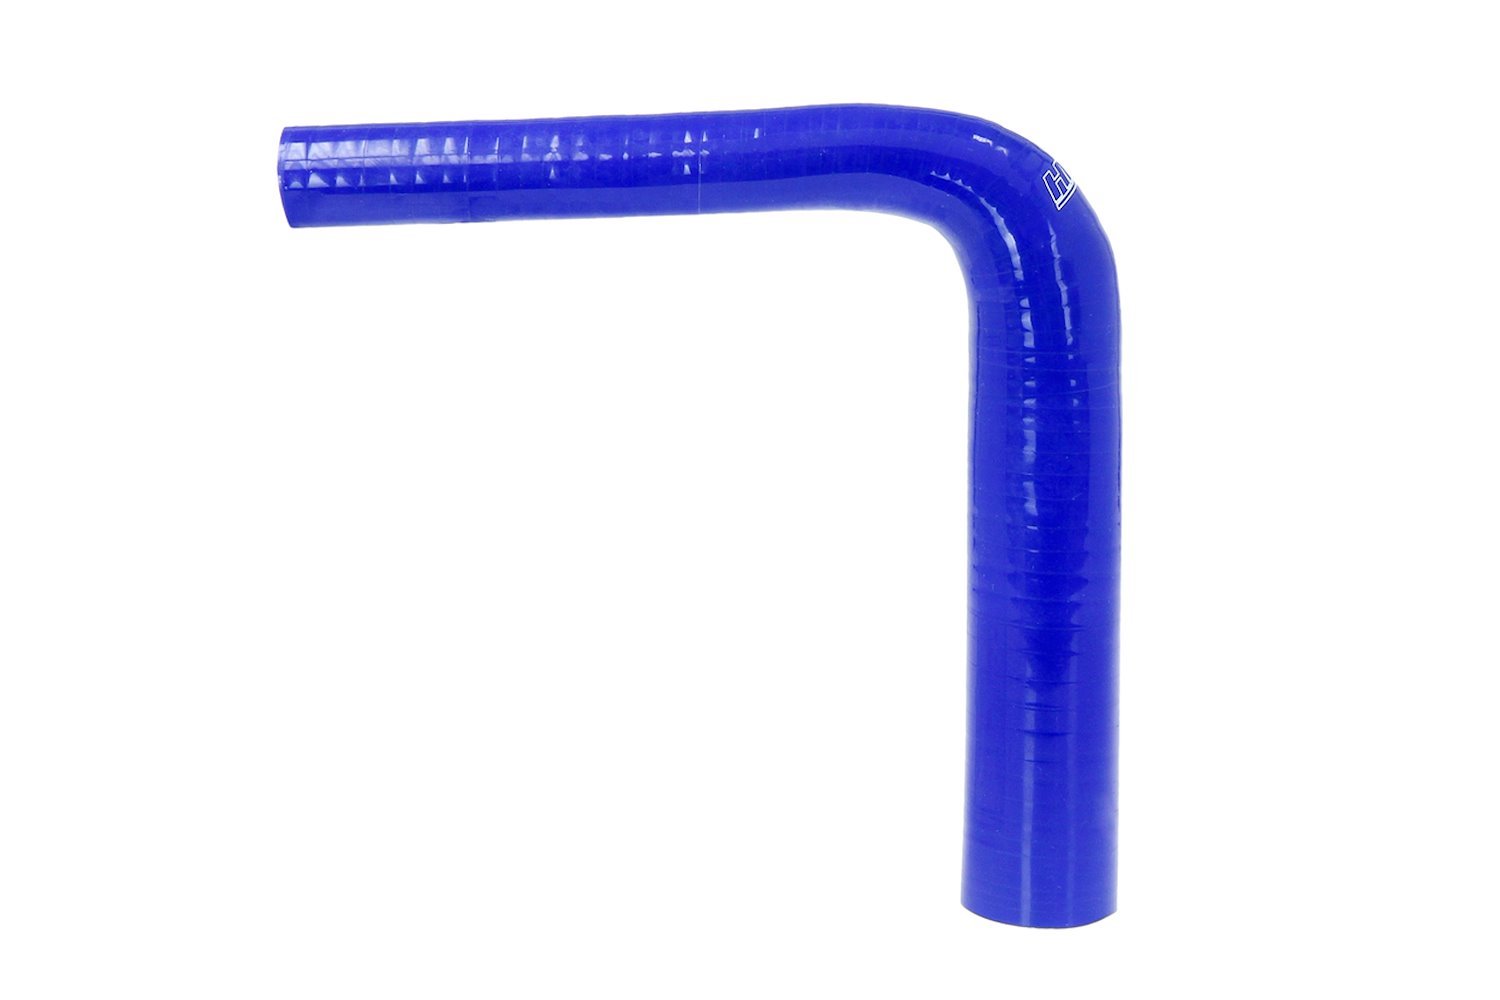 HTSER90-118-187-BLUE Silicone 90-Degree Elbow Hose, High-Temp Reinforced, 1-3/16 in. - 1-7/8 in. ID, Blue